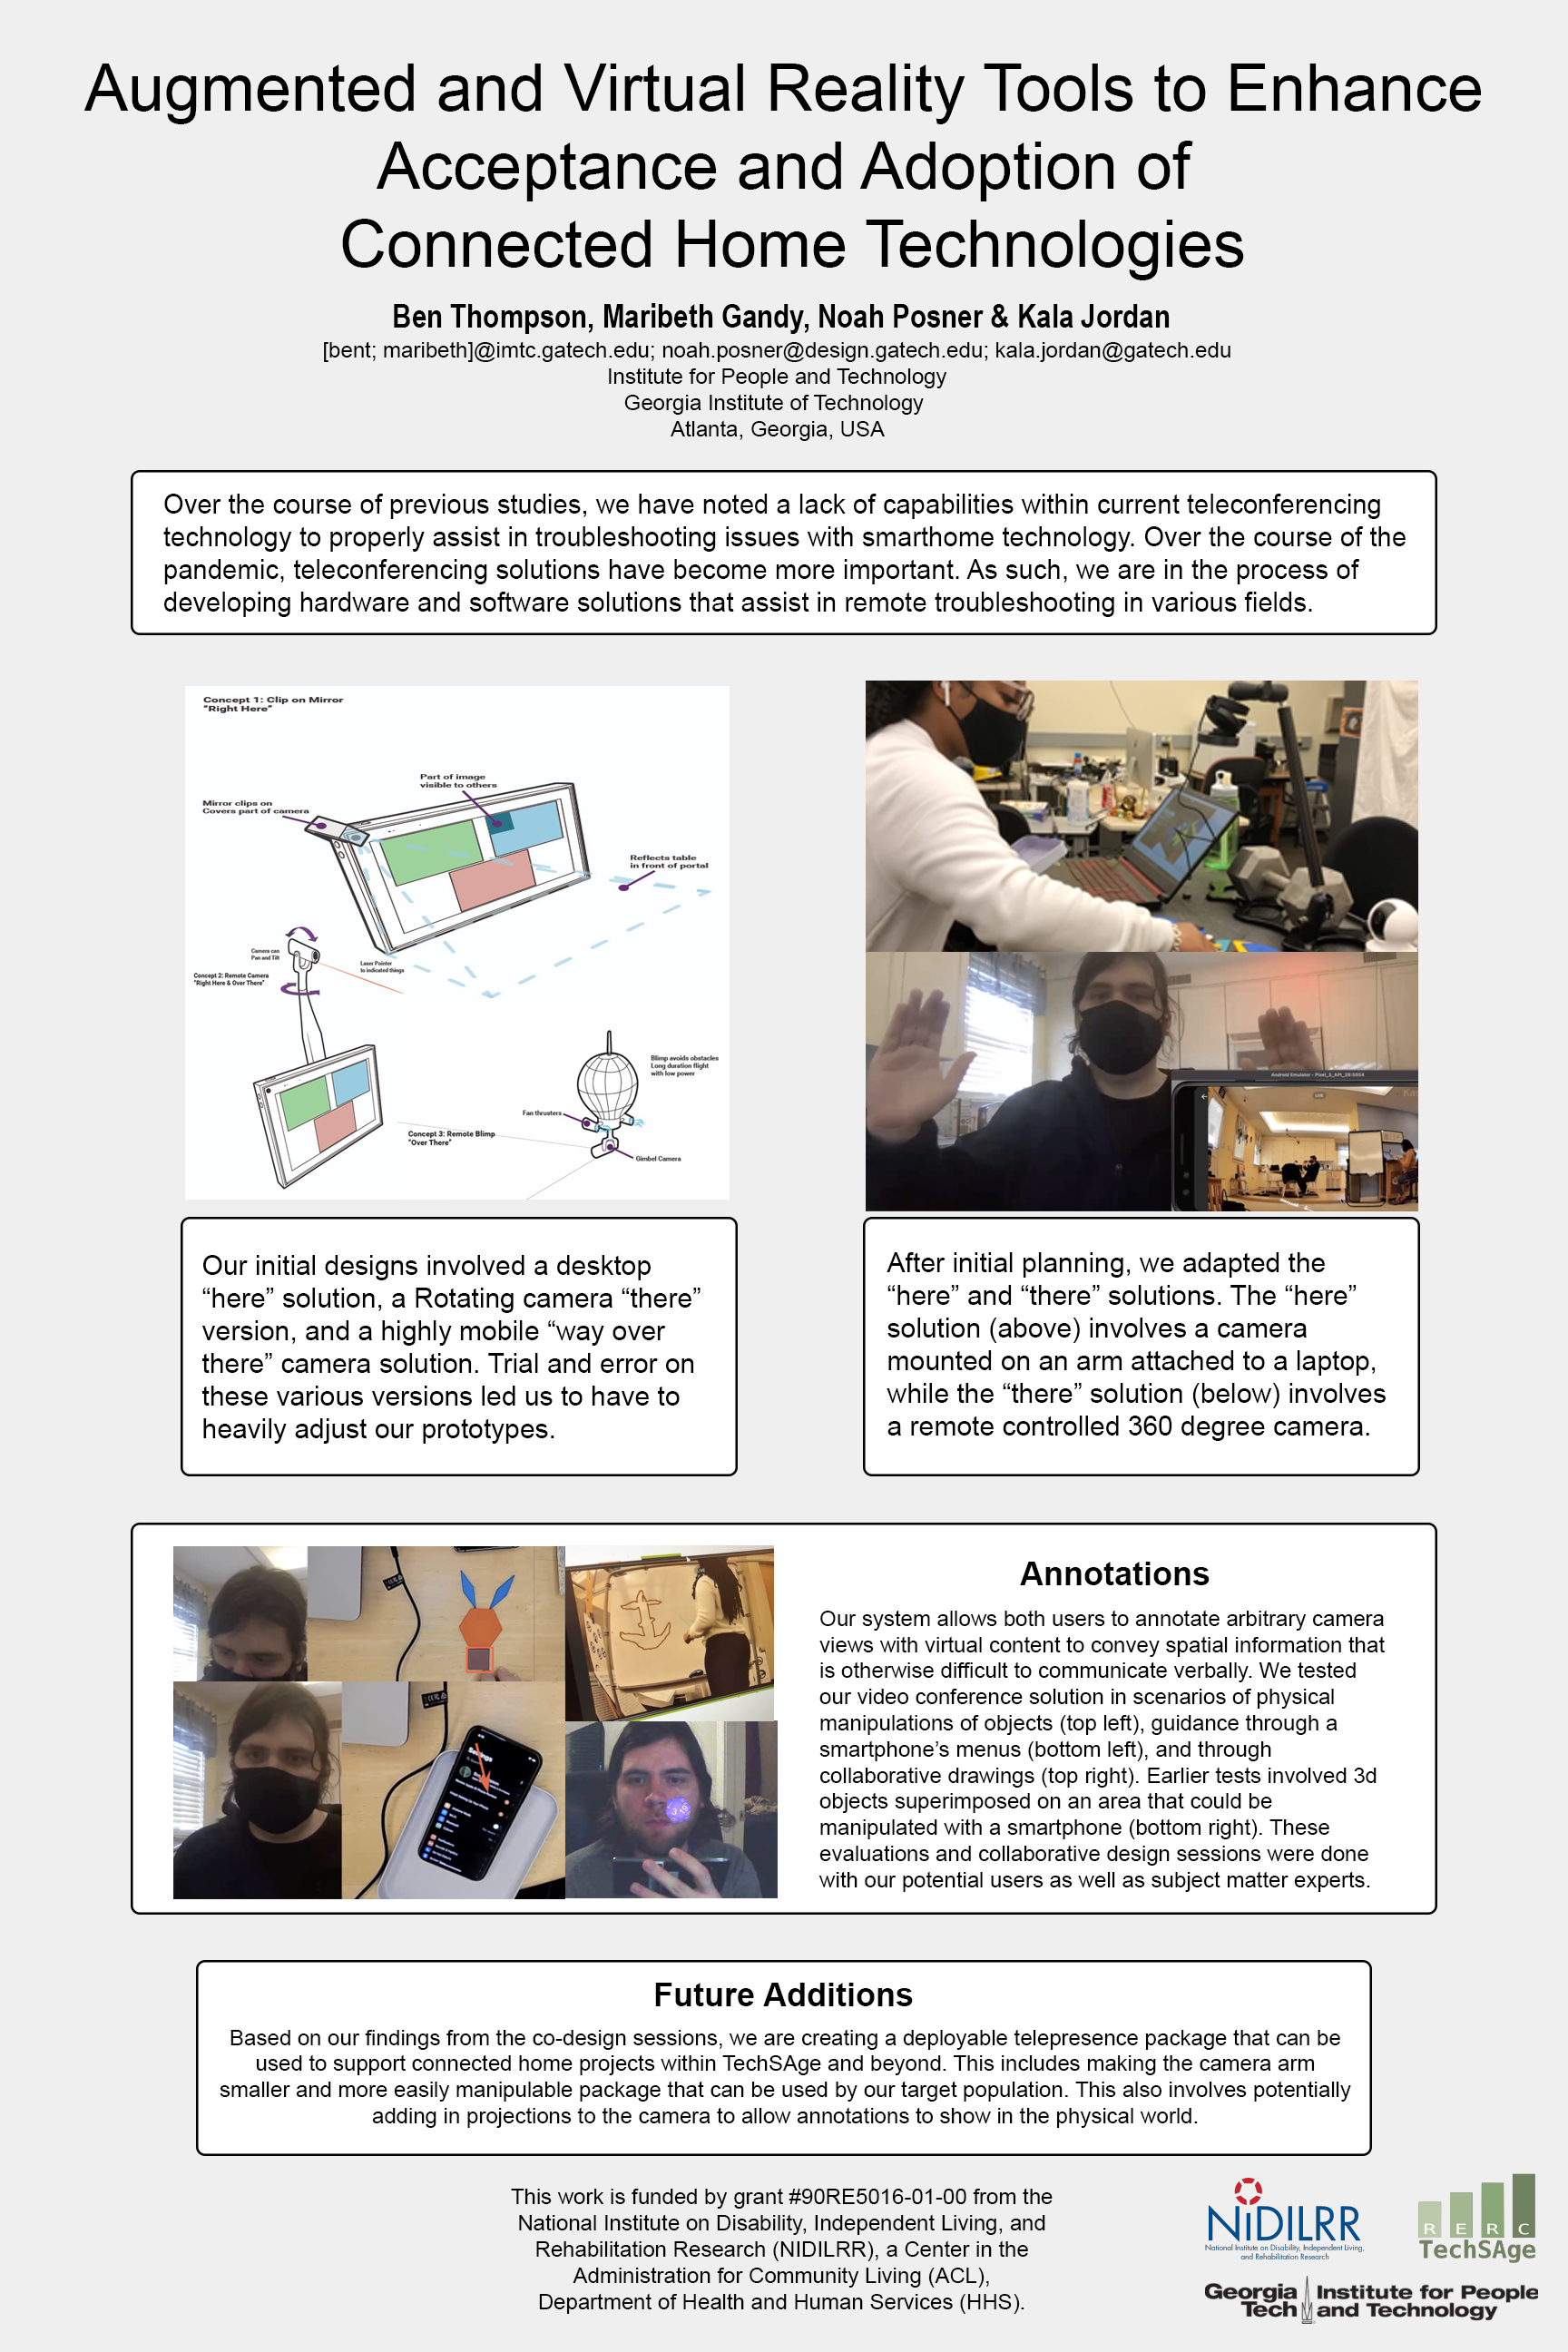 Screenshot of poster "Augmented and Virtual Reality Tools"